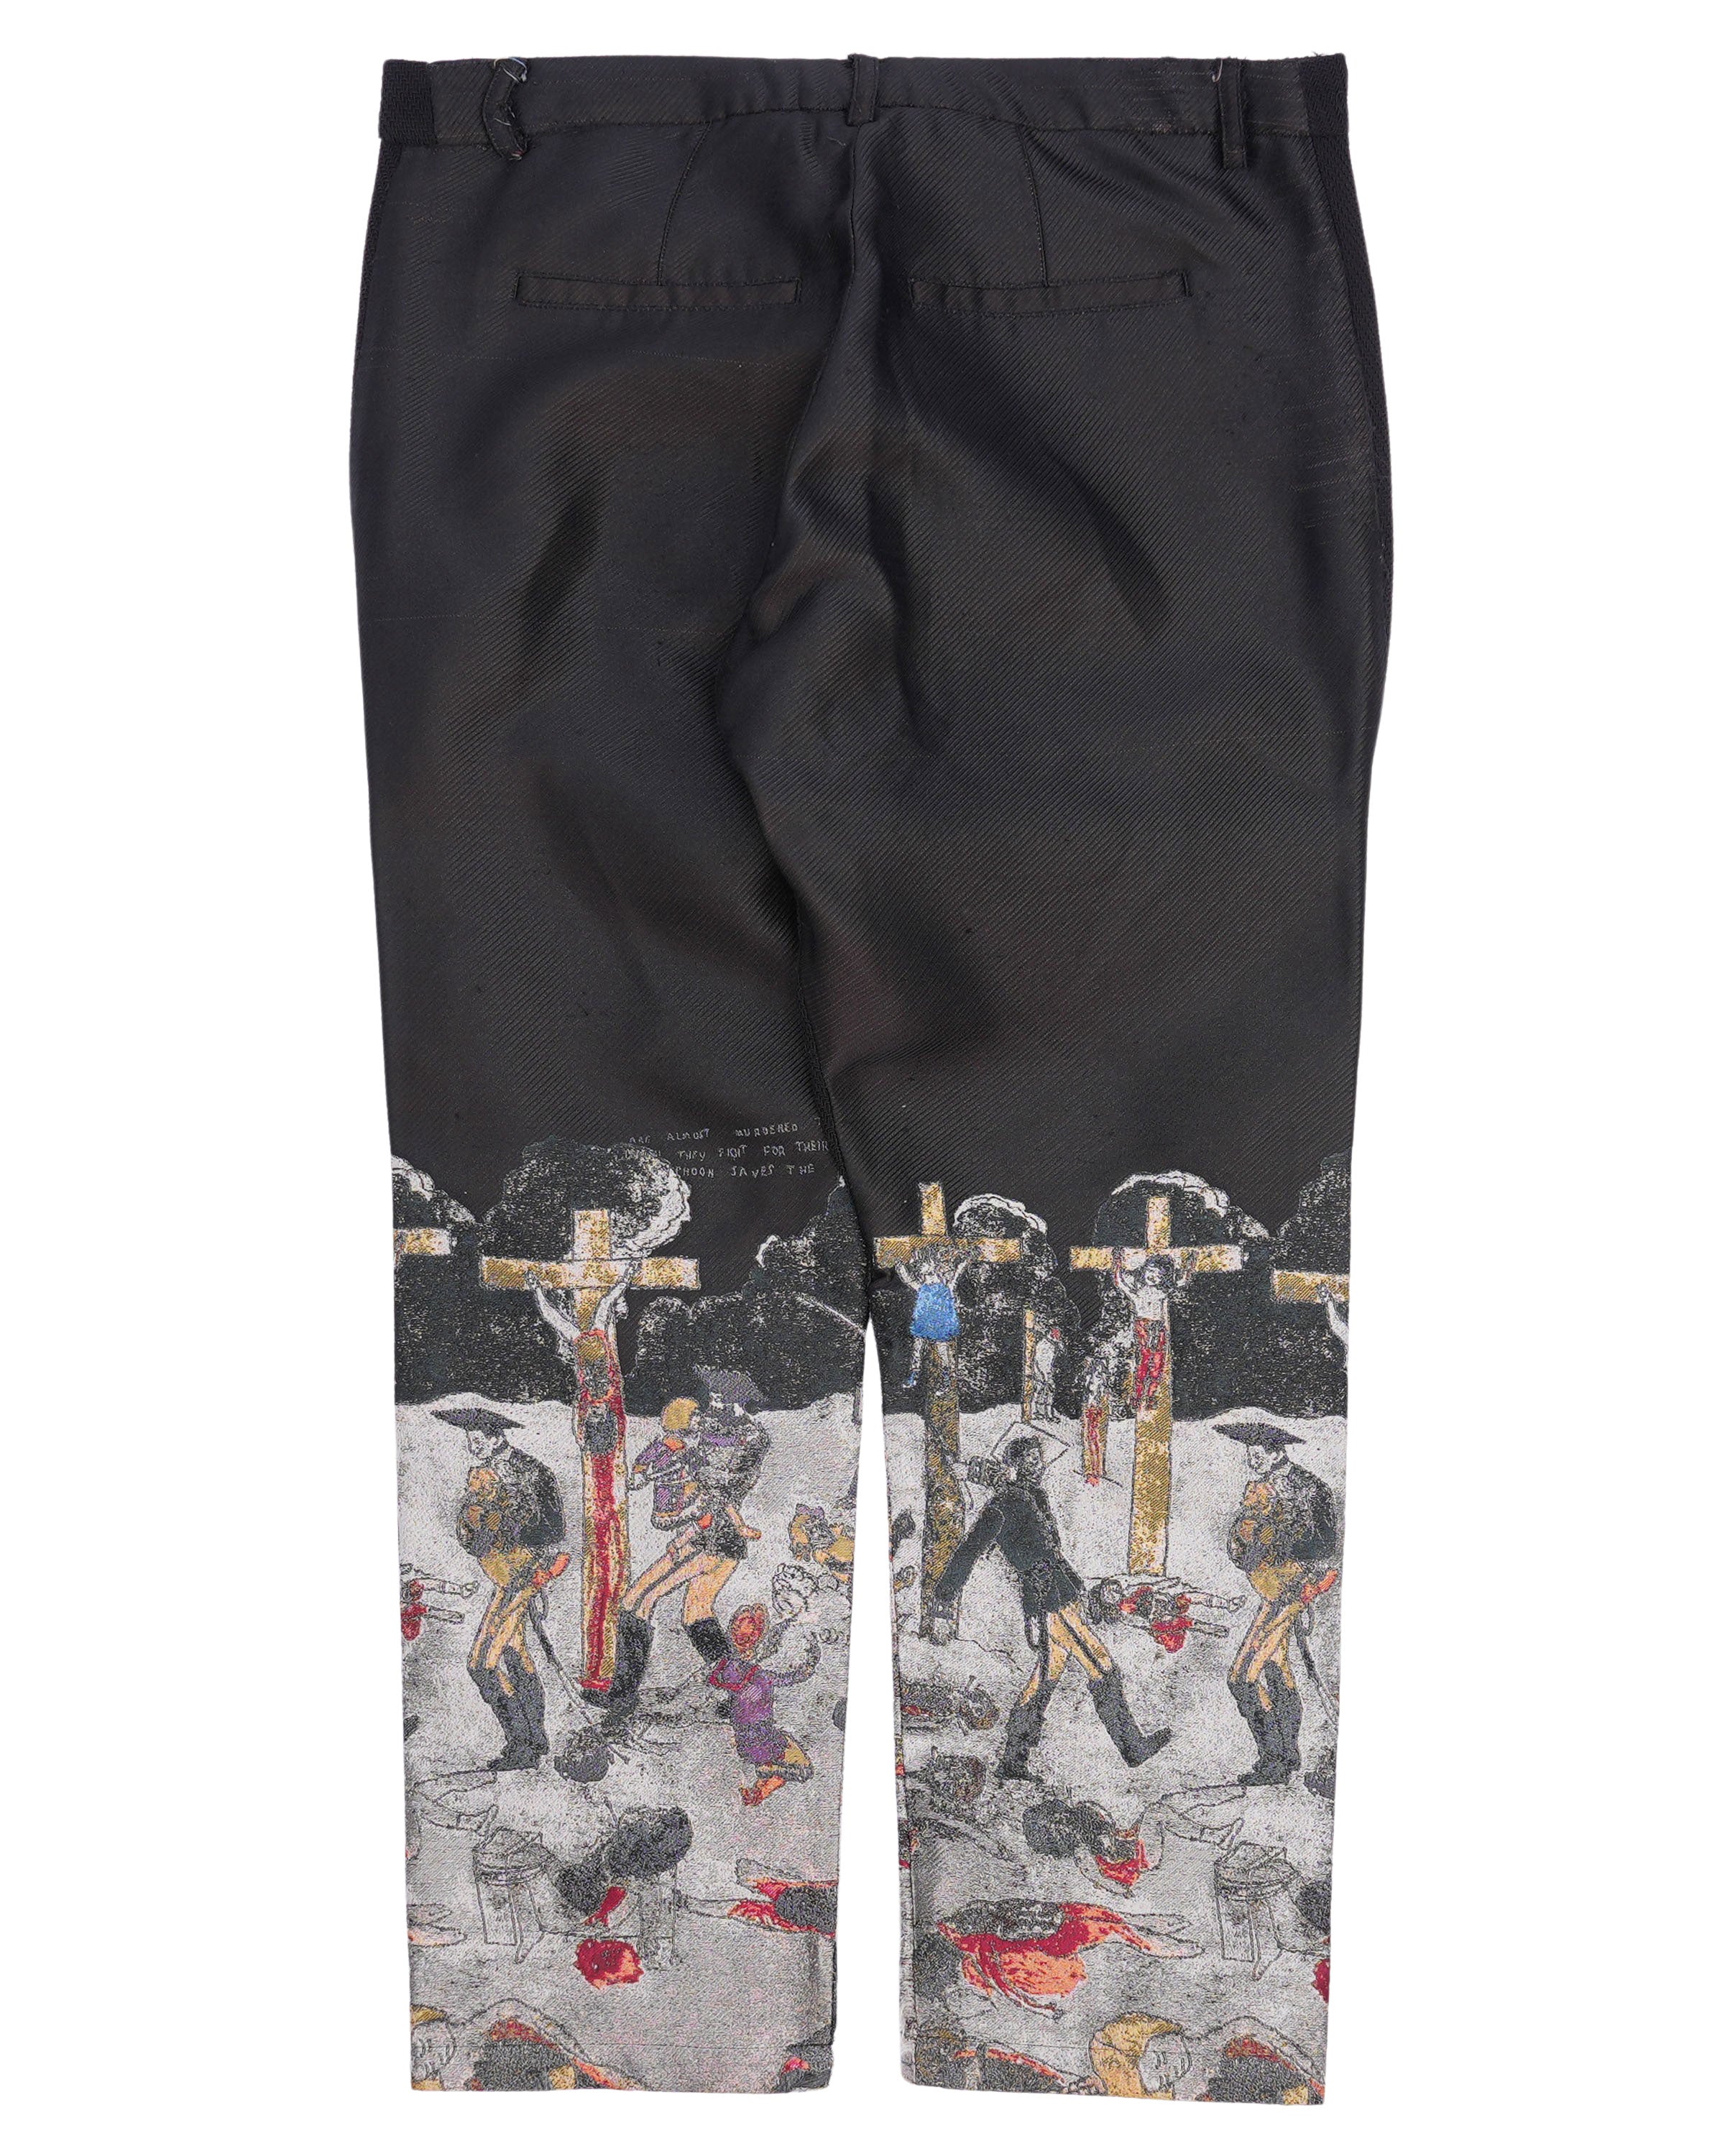 FW19 Crucifixion Embroidery Trousers